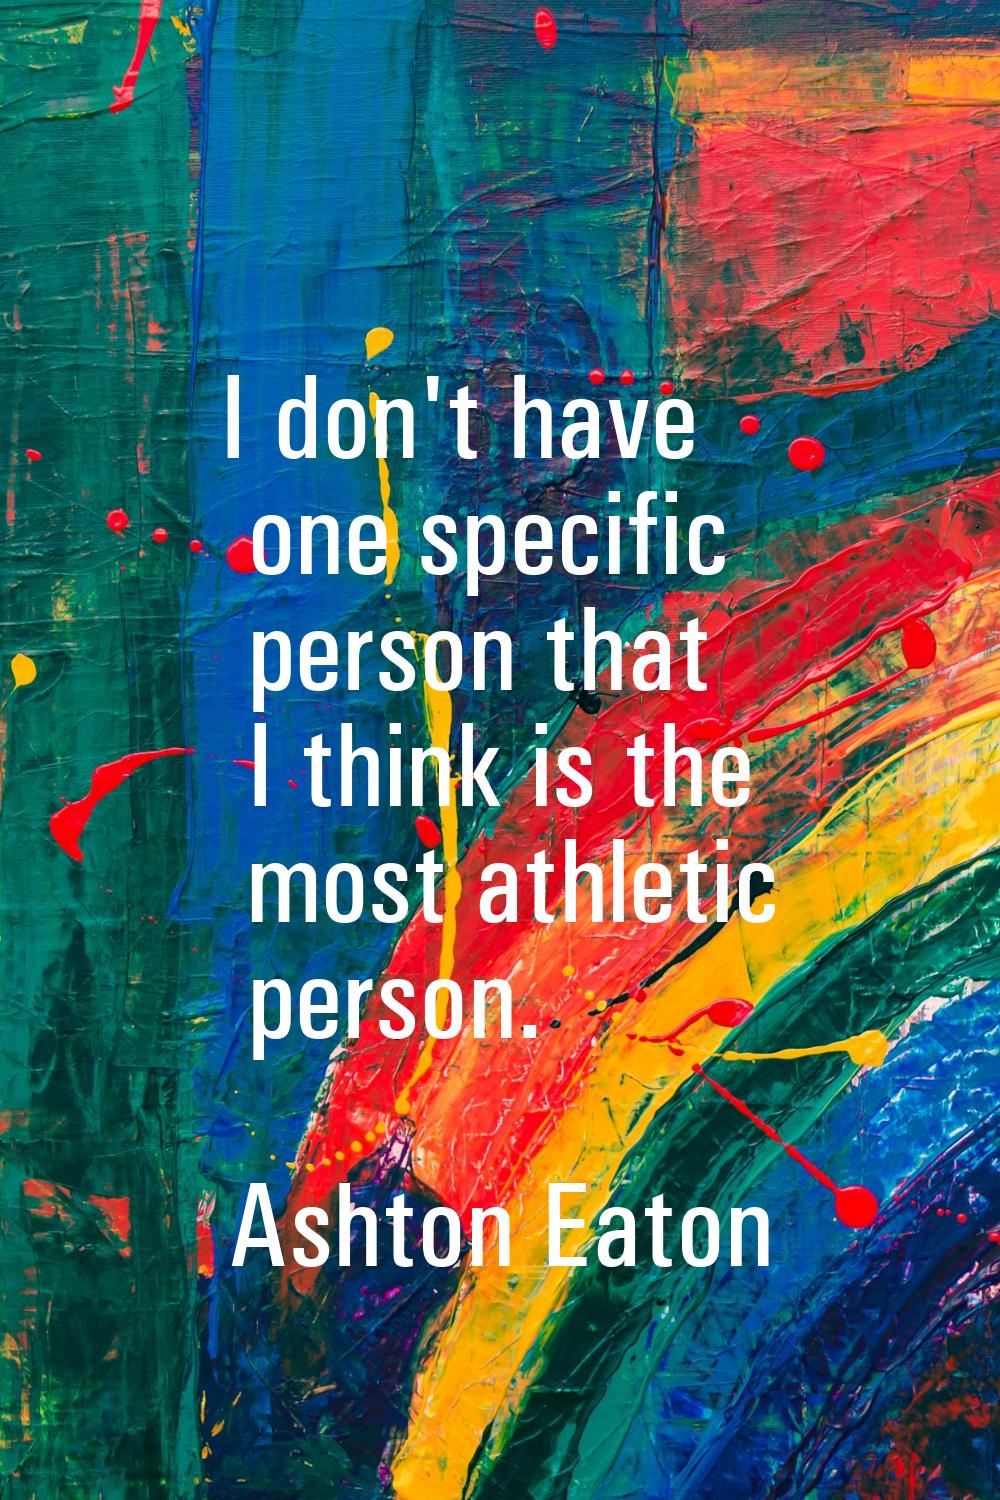 I don't have one specific person that I think is the most athletic person.